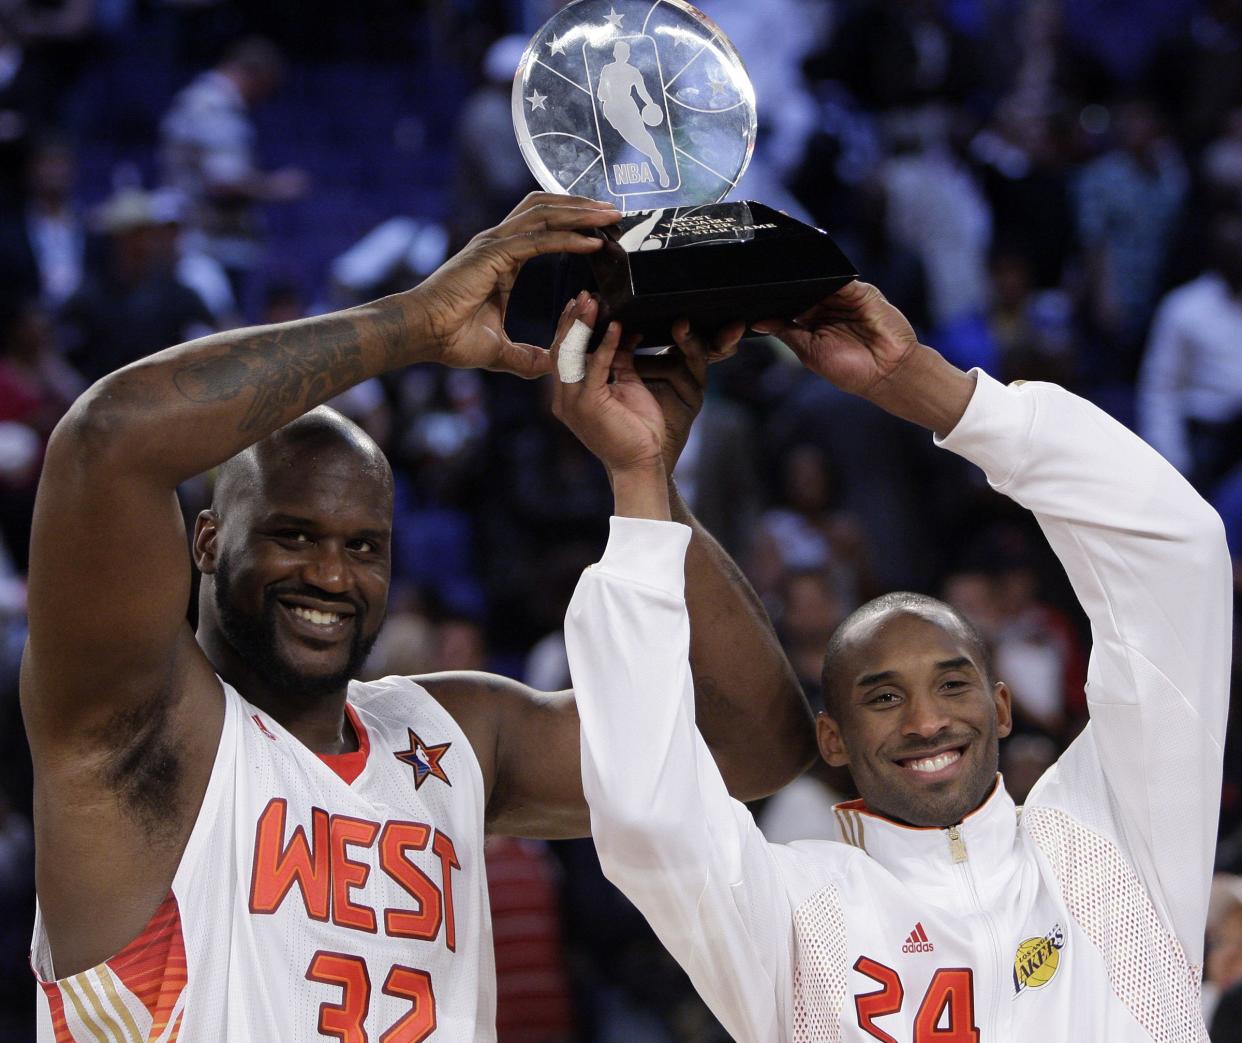 Western All-Star Shaquille O'Neal (32) of the Phoenix Suns and Western All-Star Kobe Bryant (24) of the Los Angeles Lakers share the MVP award from the NBA All-Star basketball game Sunday, Feb. 15, 2009, in Phoenix.